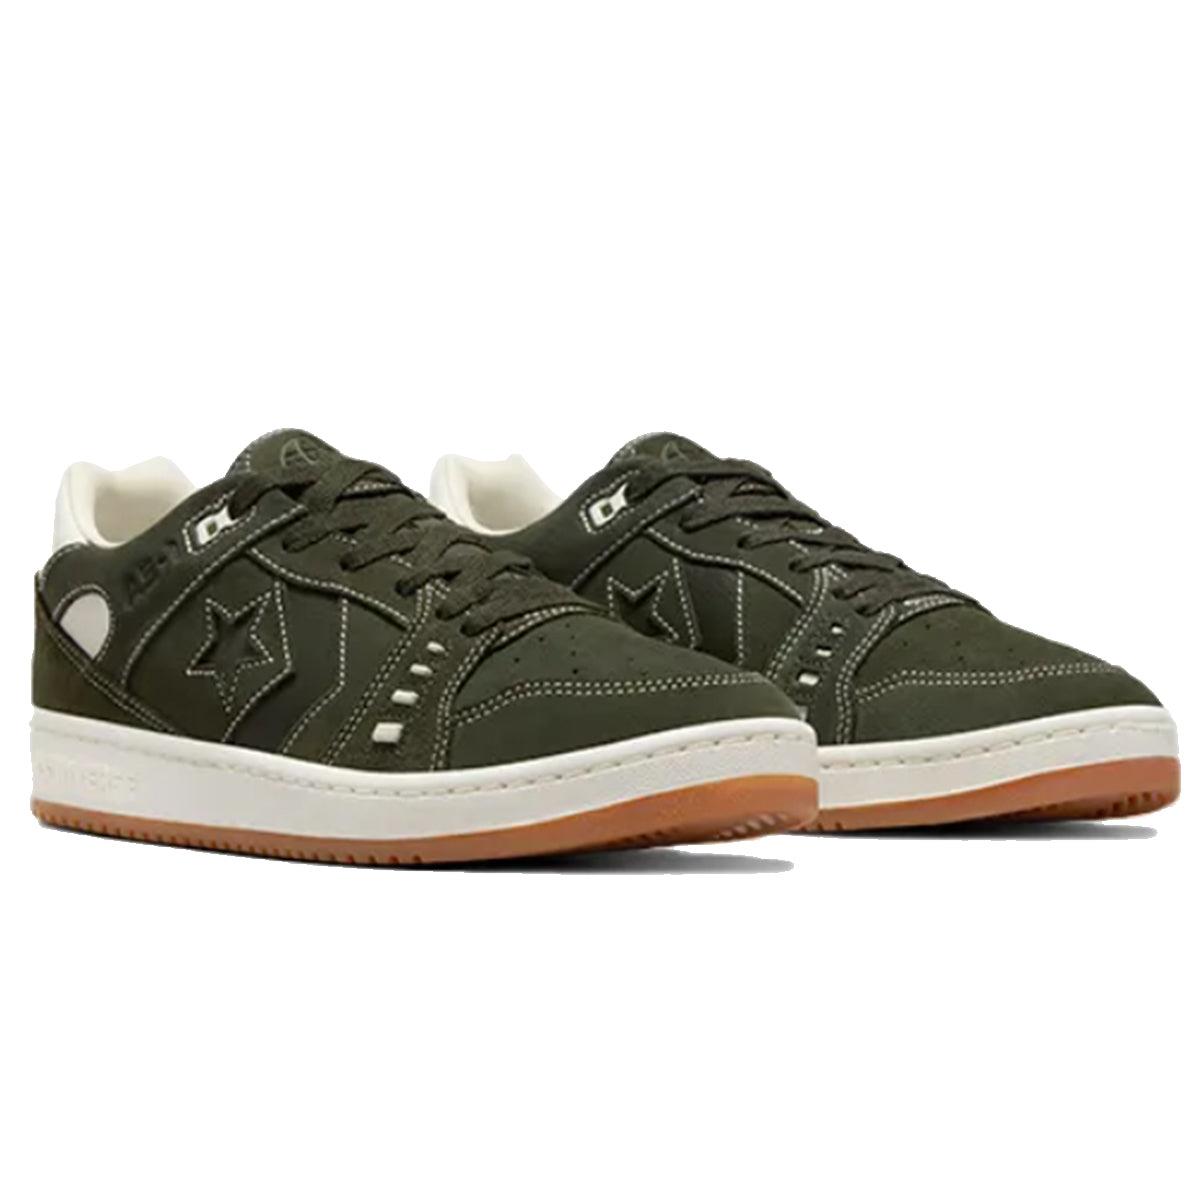 Converse Alexis Sablone AS-1 Pro - Forest Green/gum Forest Green/Gum